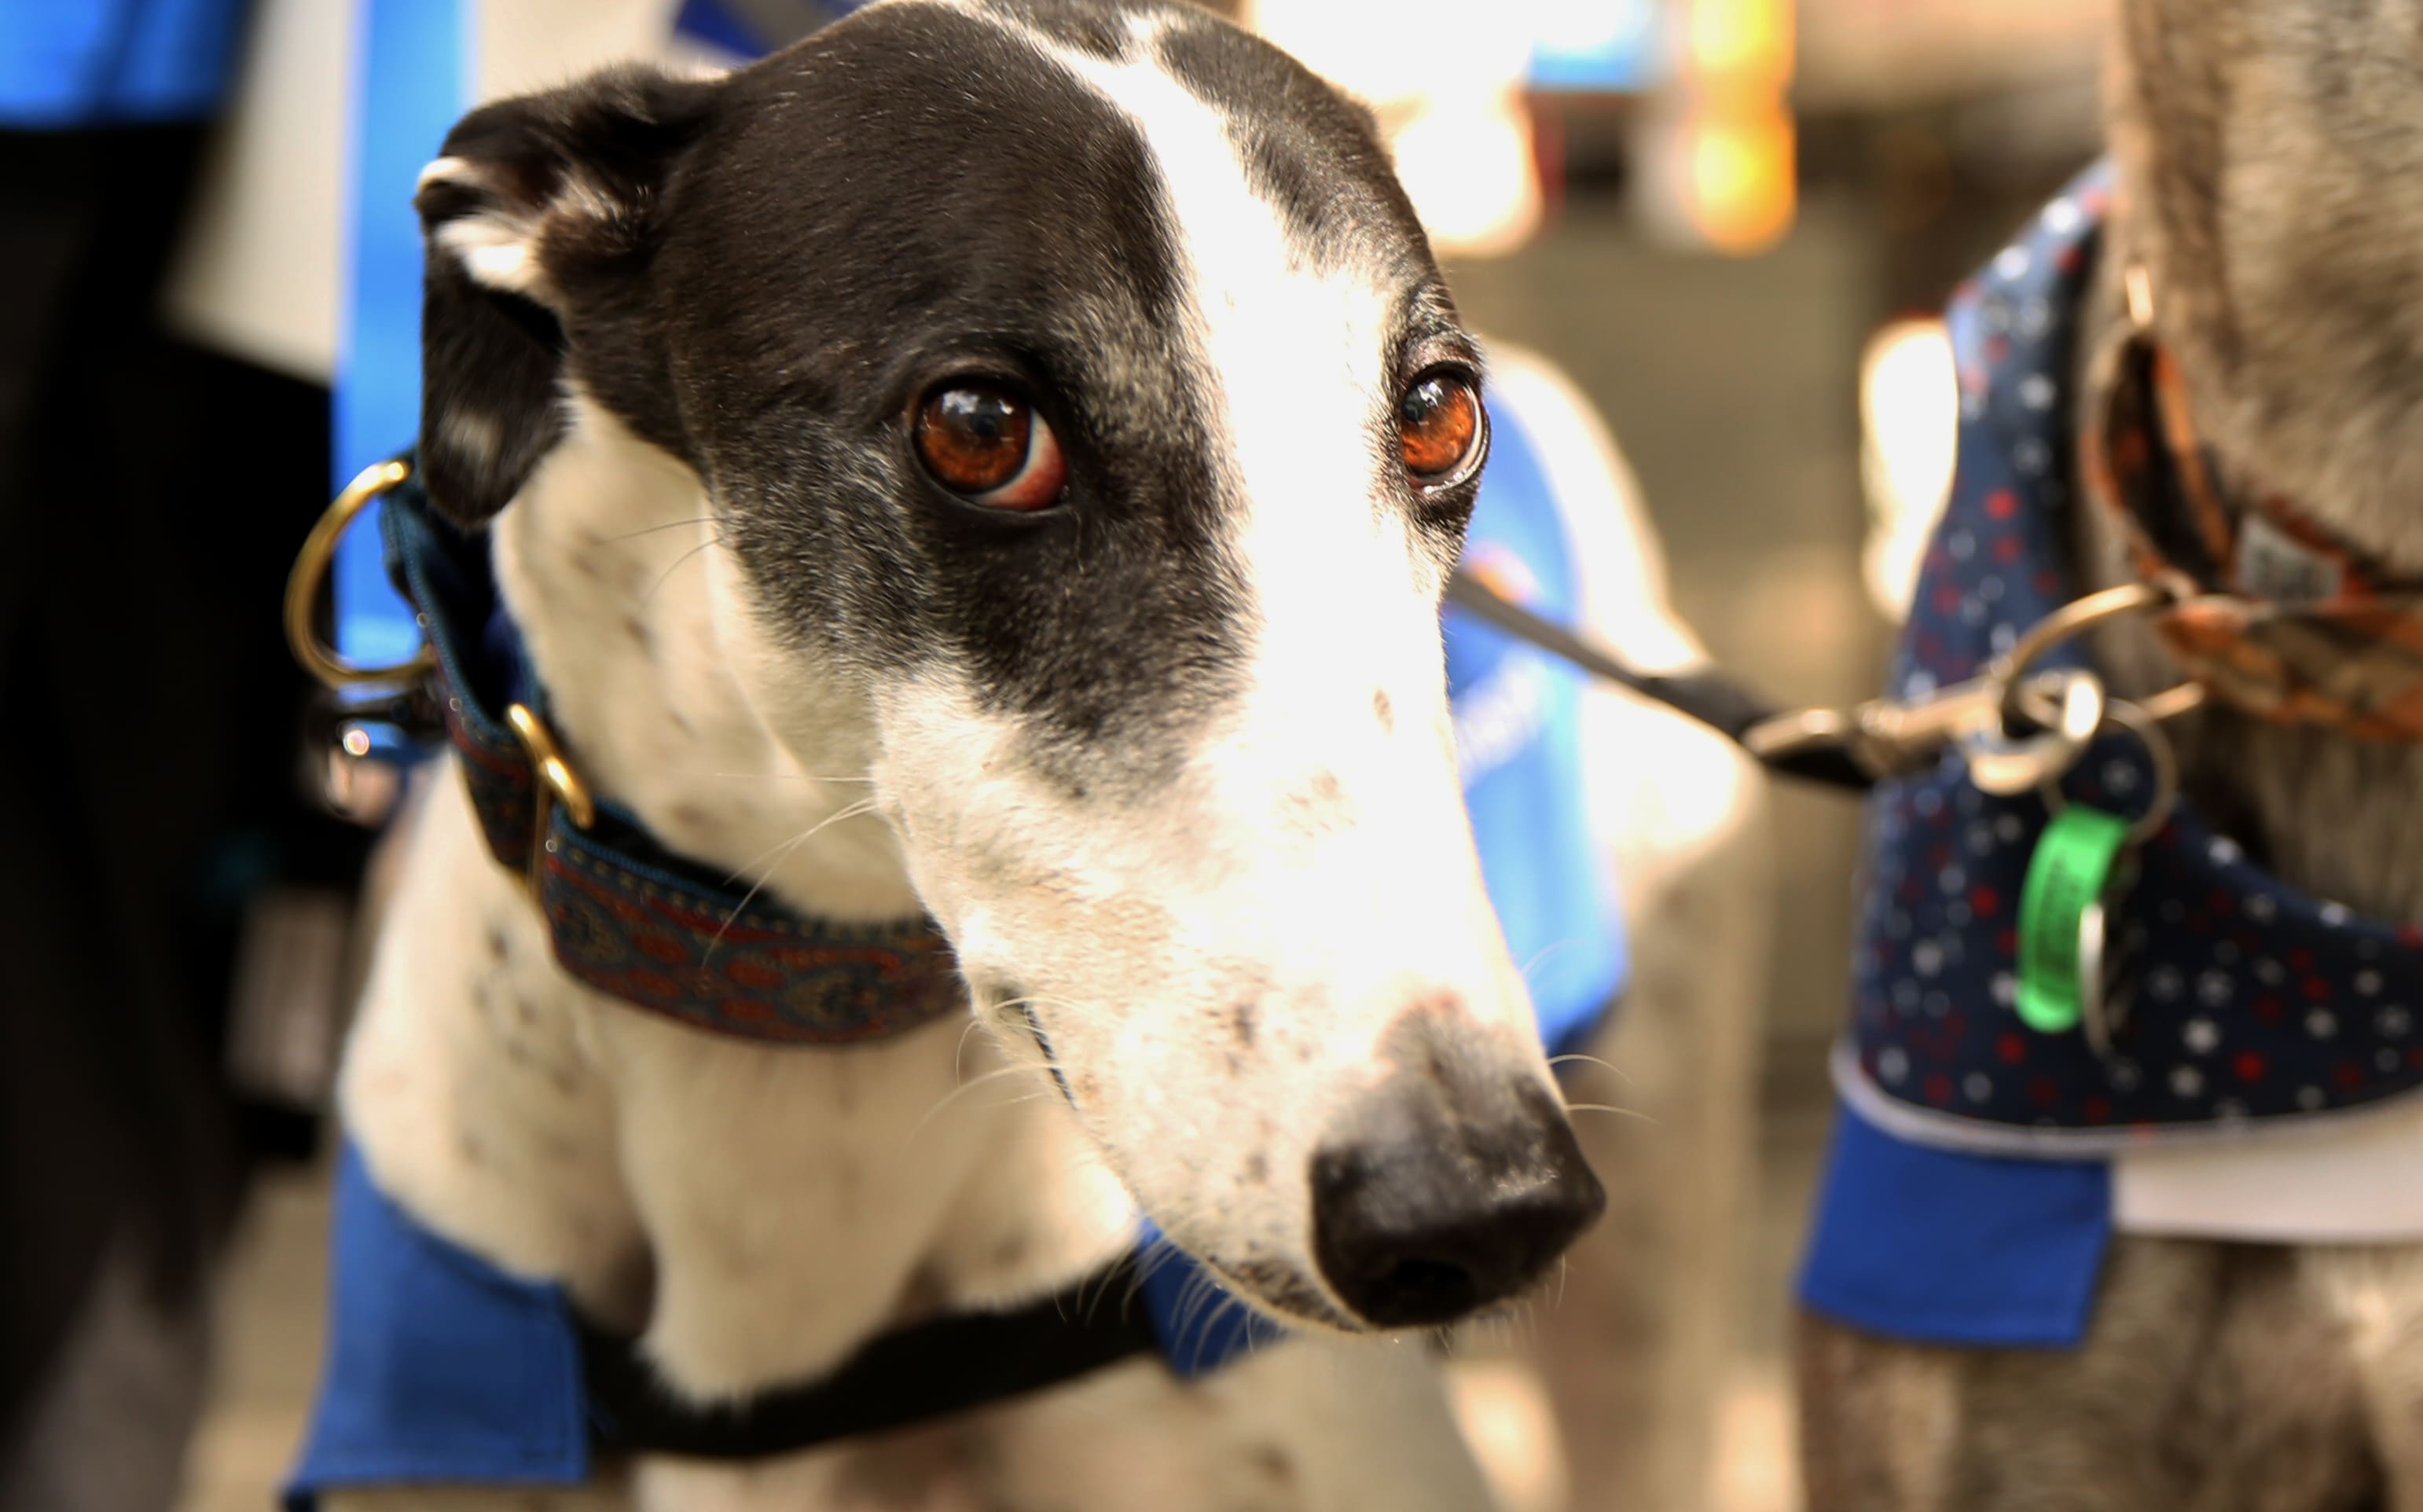 Greyhounds as Pets fundraising for the organisation.